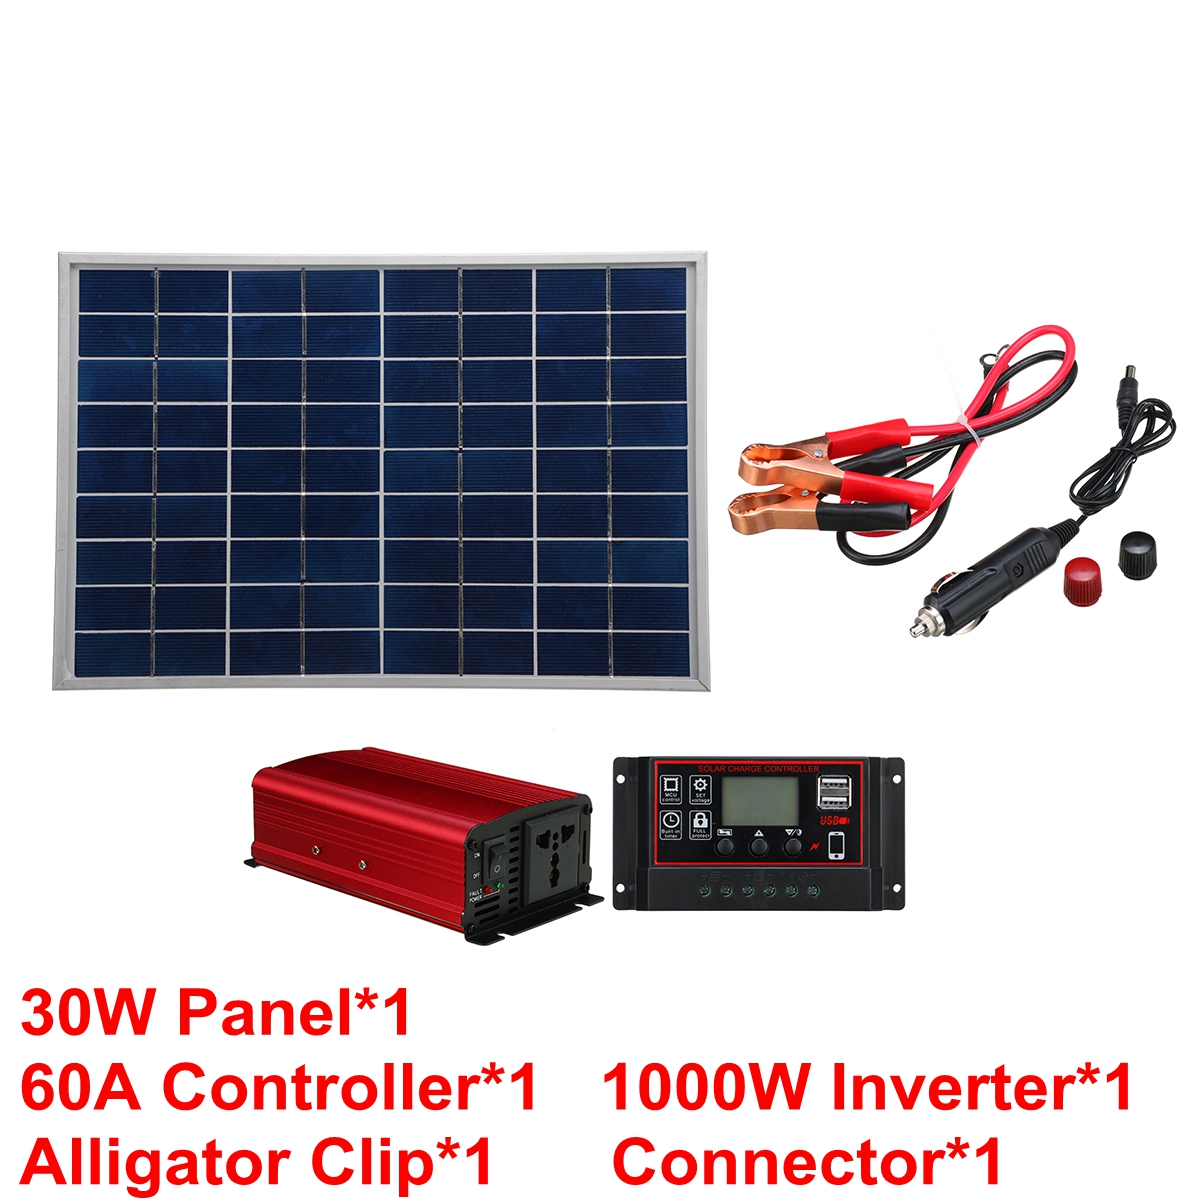 Solar-Panel-Power-System-Complete-Kit-18V-30W-Solar-Panel-60A-Charger-USB-Controller-1000W-Solar-Inv-1837386-1